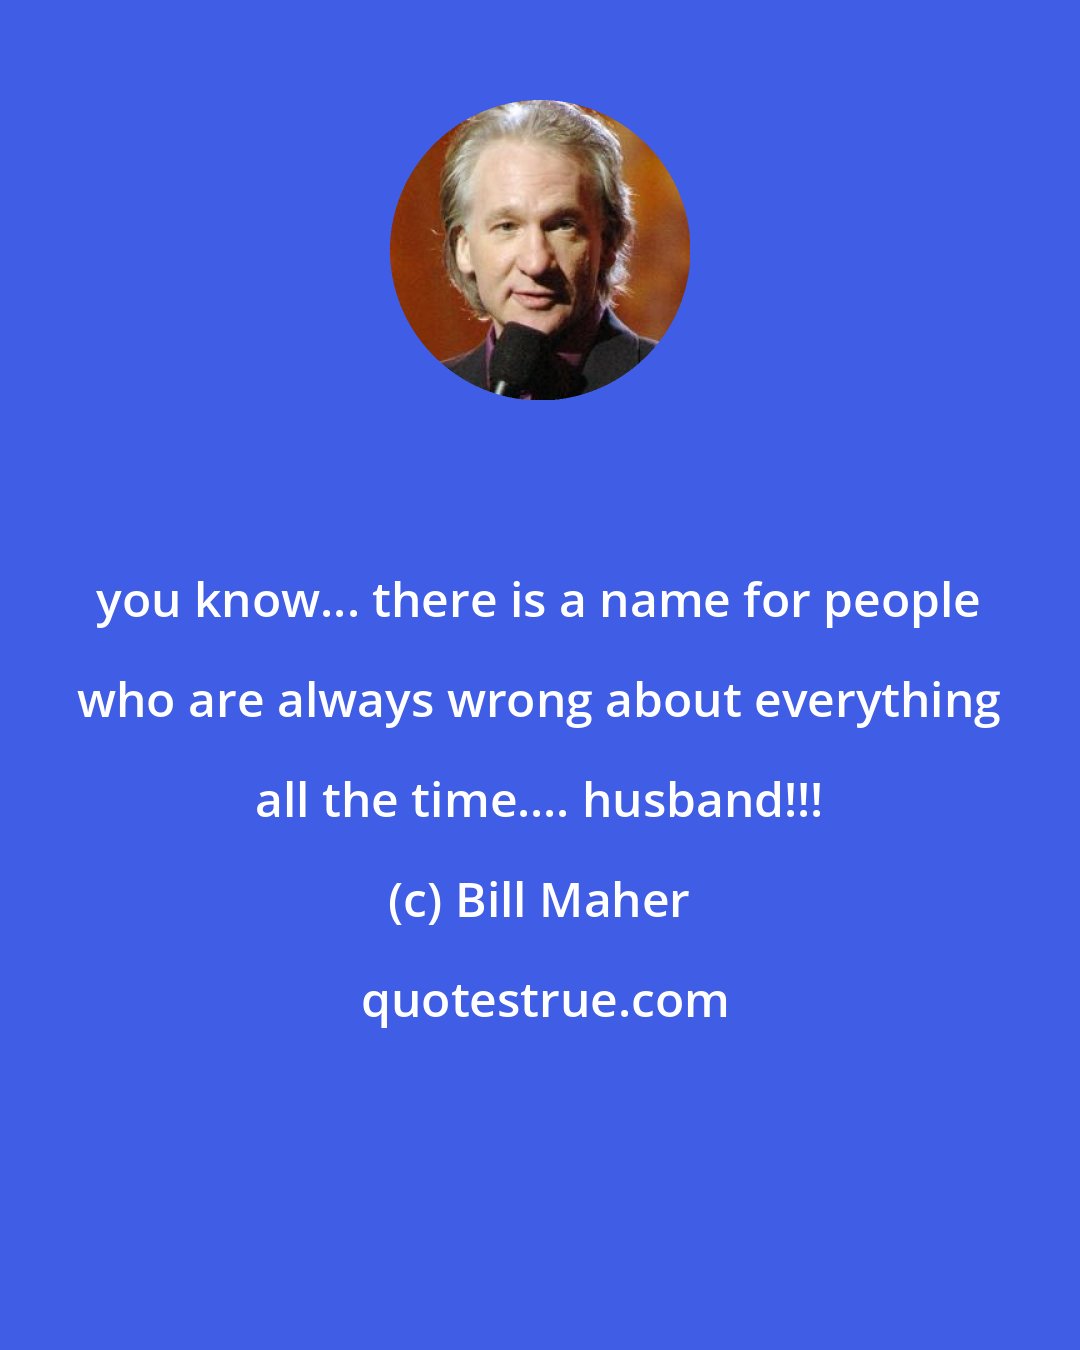 Bill Maher: you know... there is a name for people who are always wrong about everything all the time.... husband!!!